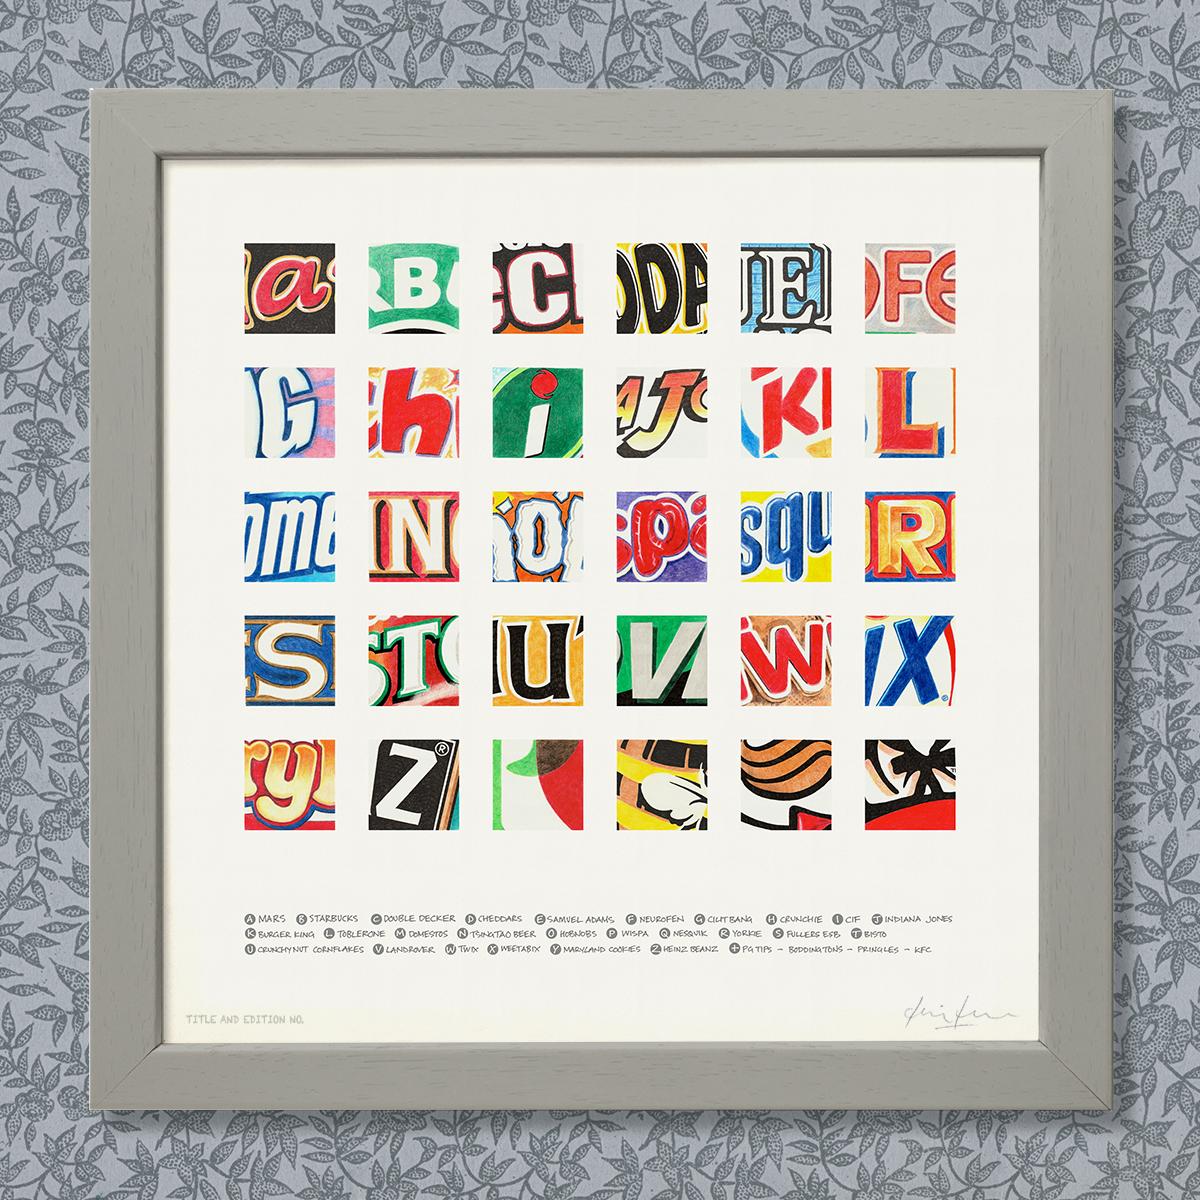 Limited edition print, a montage of letters from well-known brands in a grey frame.